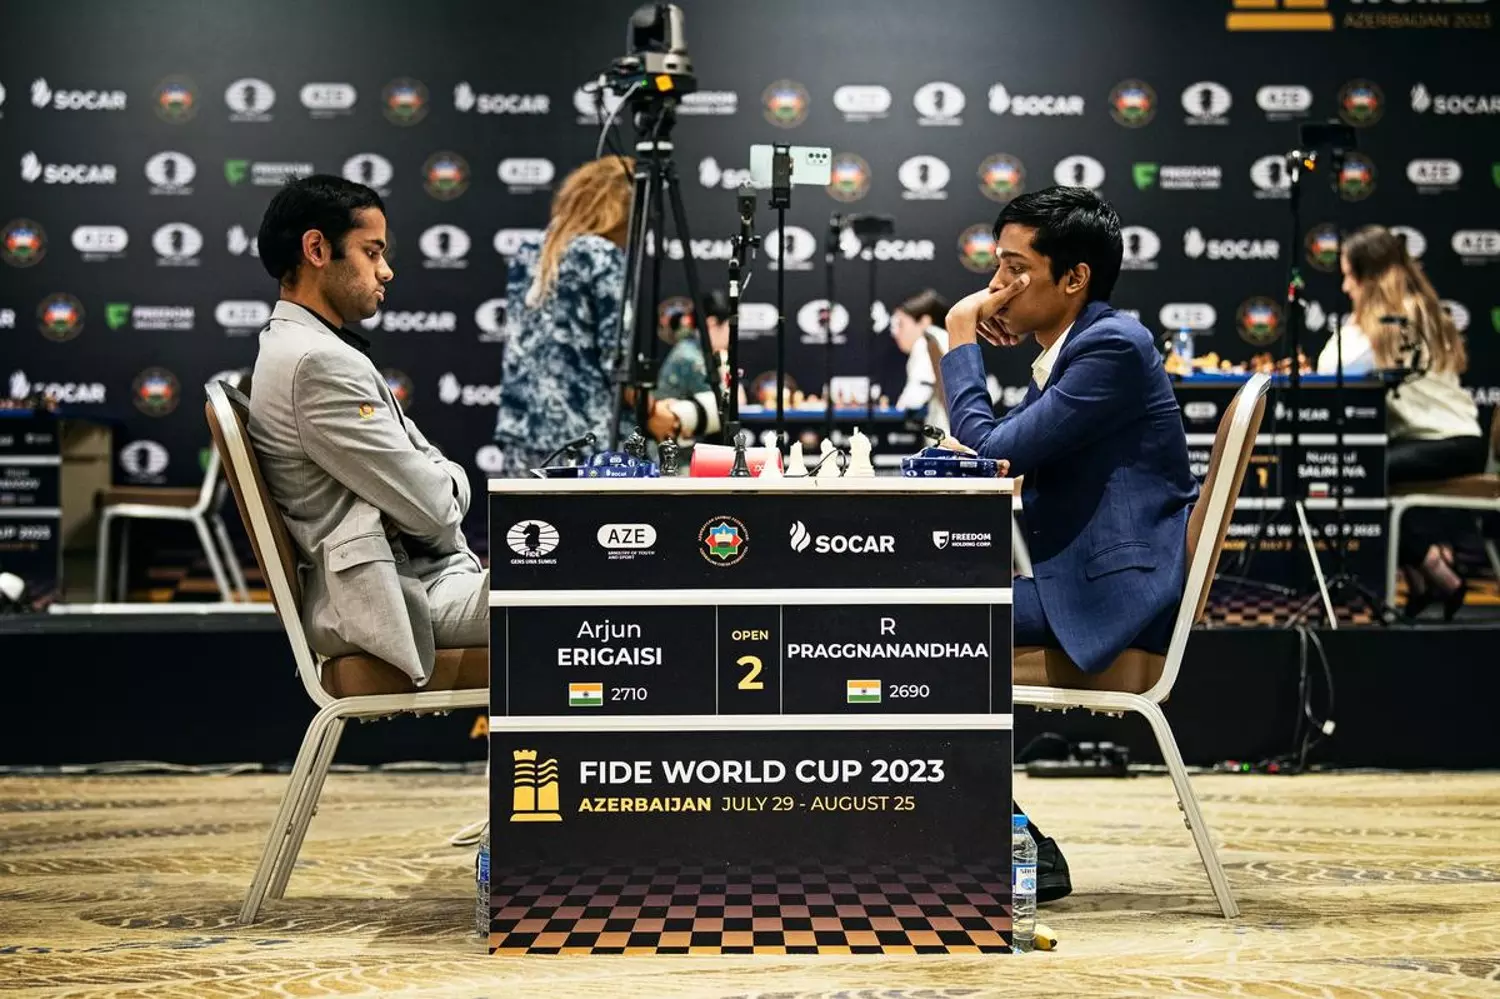 Who Is Praggnanandhaa Who Reached Chess WC 2023 Final?